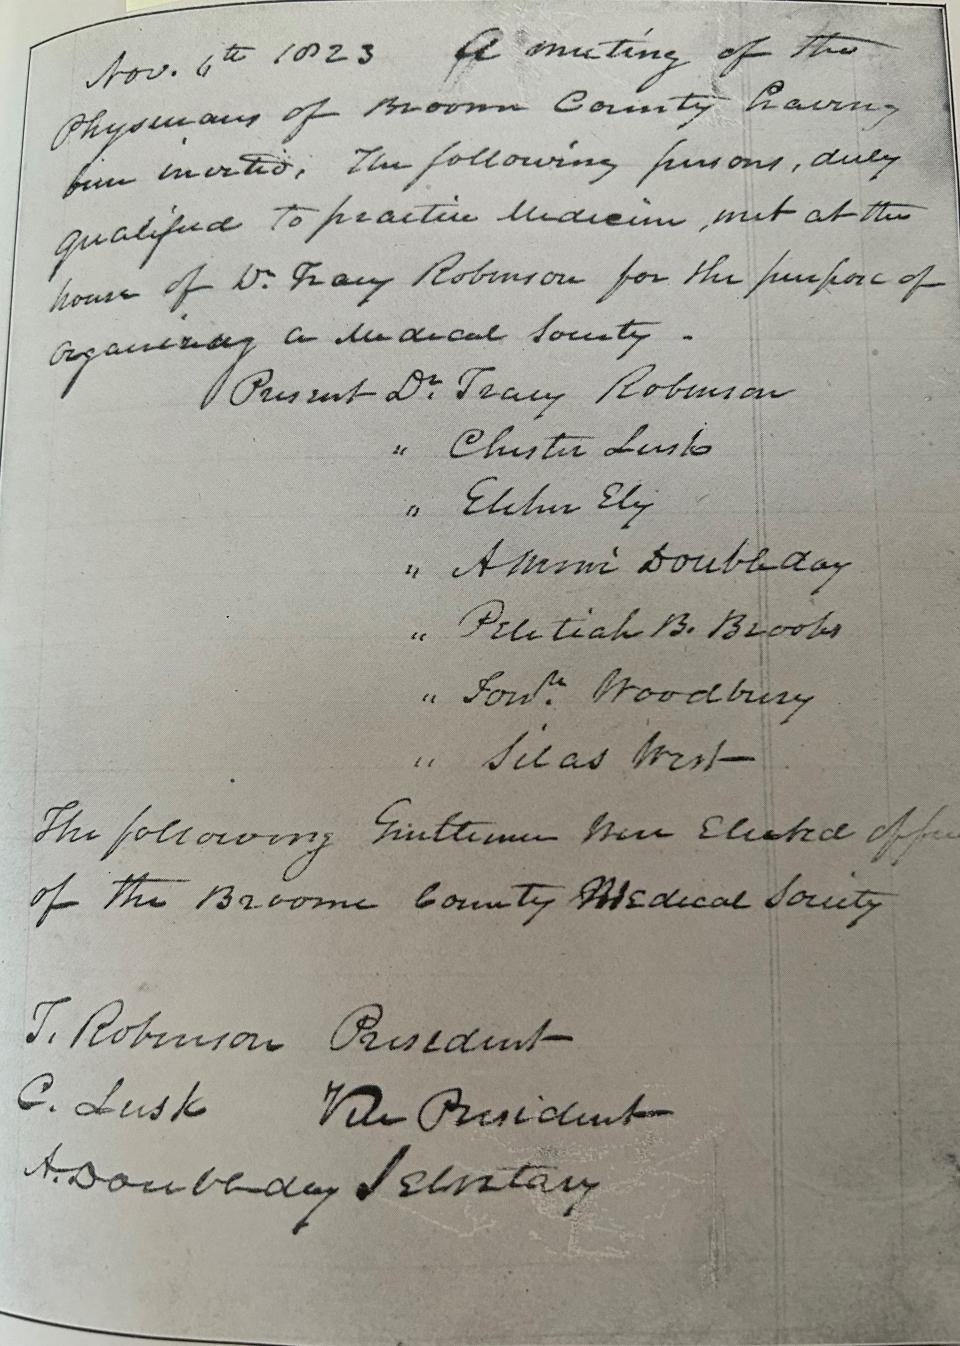 The minutes of the Broome County Medical Society in 1823.